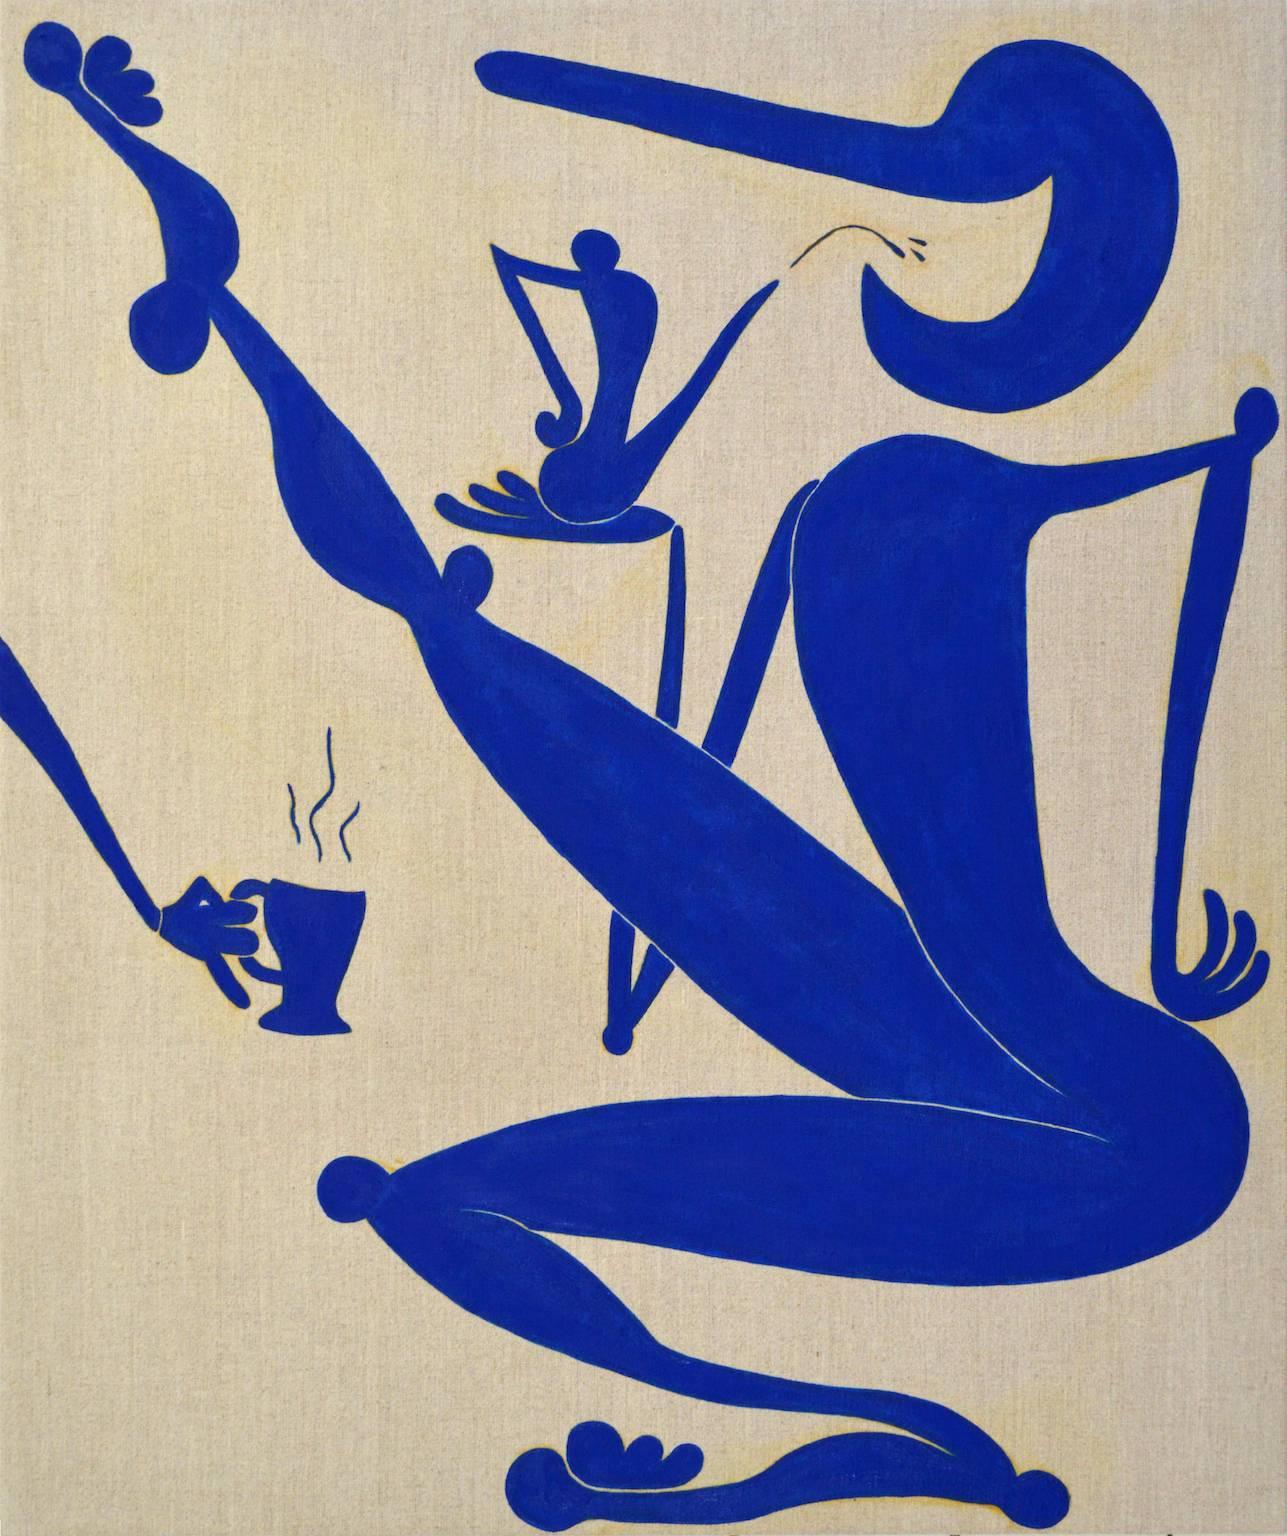 
This blue and white painting is part of Todd Kelly’s figurative Jolly Liar series, which are pared down to elegant blue figures on unpainted linen. Stylistically echoing Matisse’s late cut-outs, the Jolly Liar is a cartoonish character that acts as